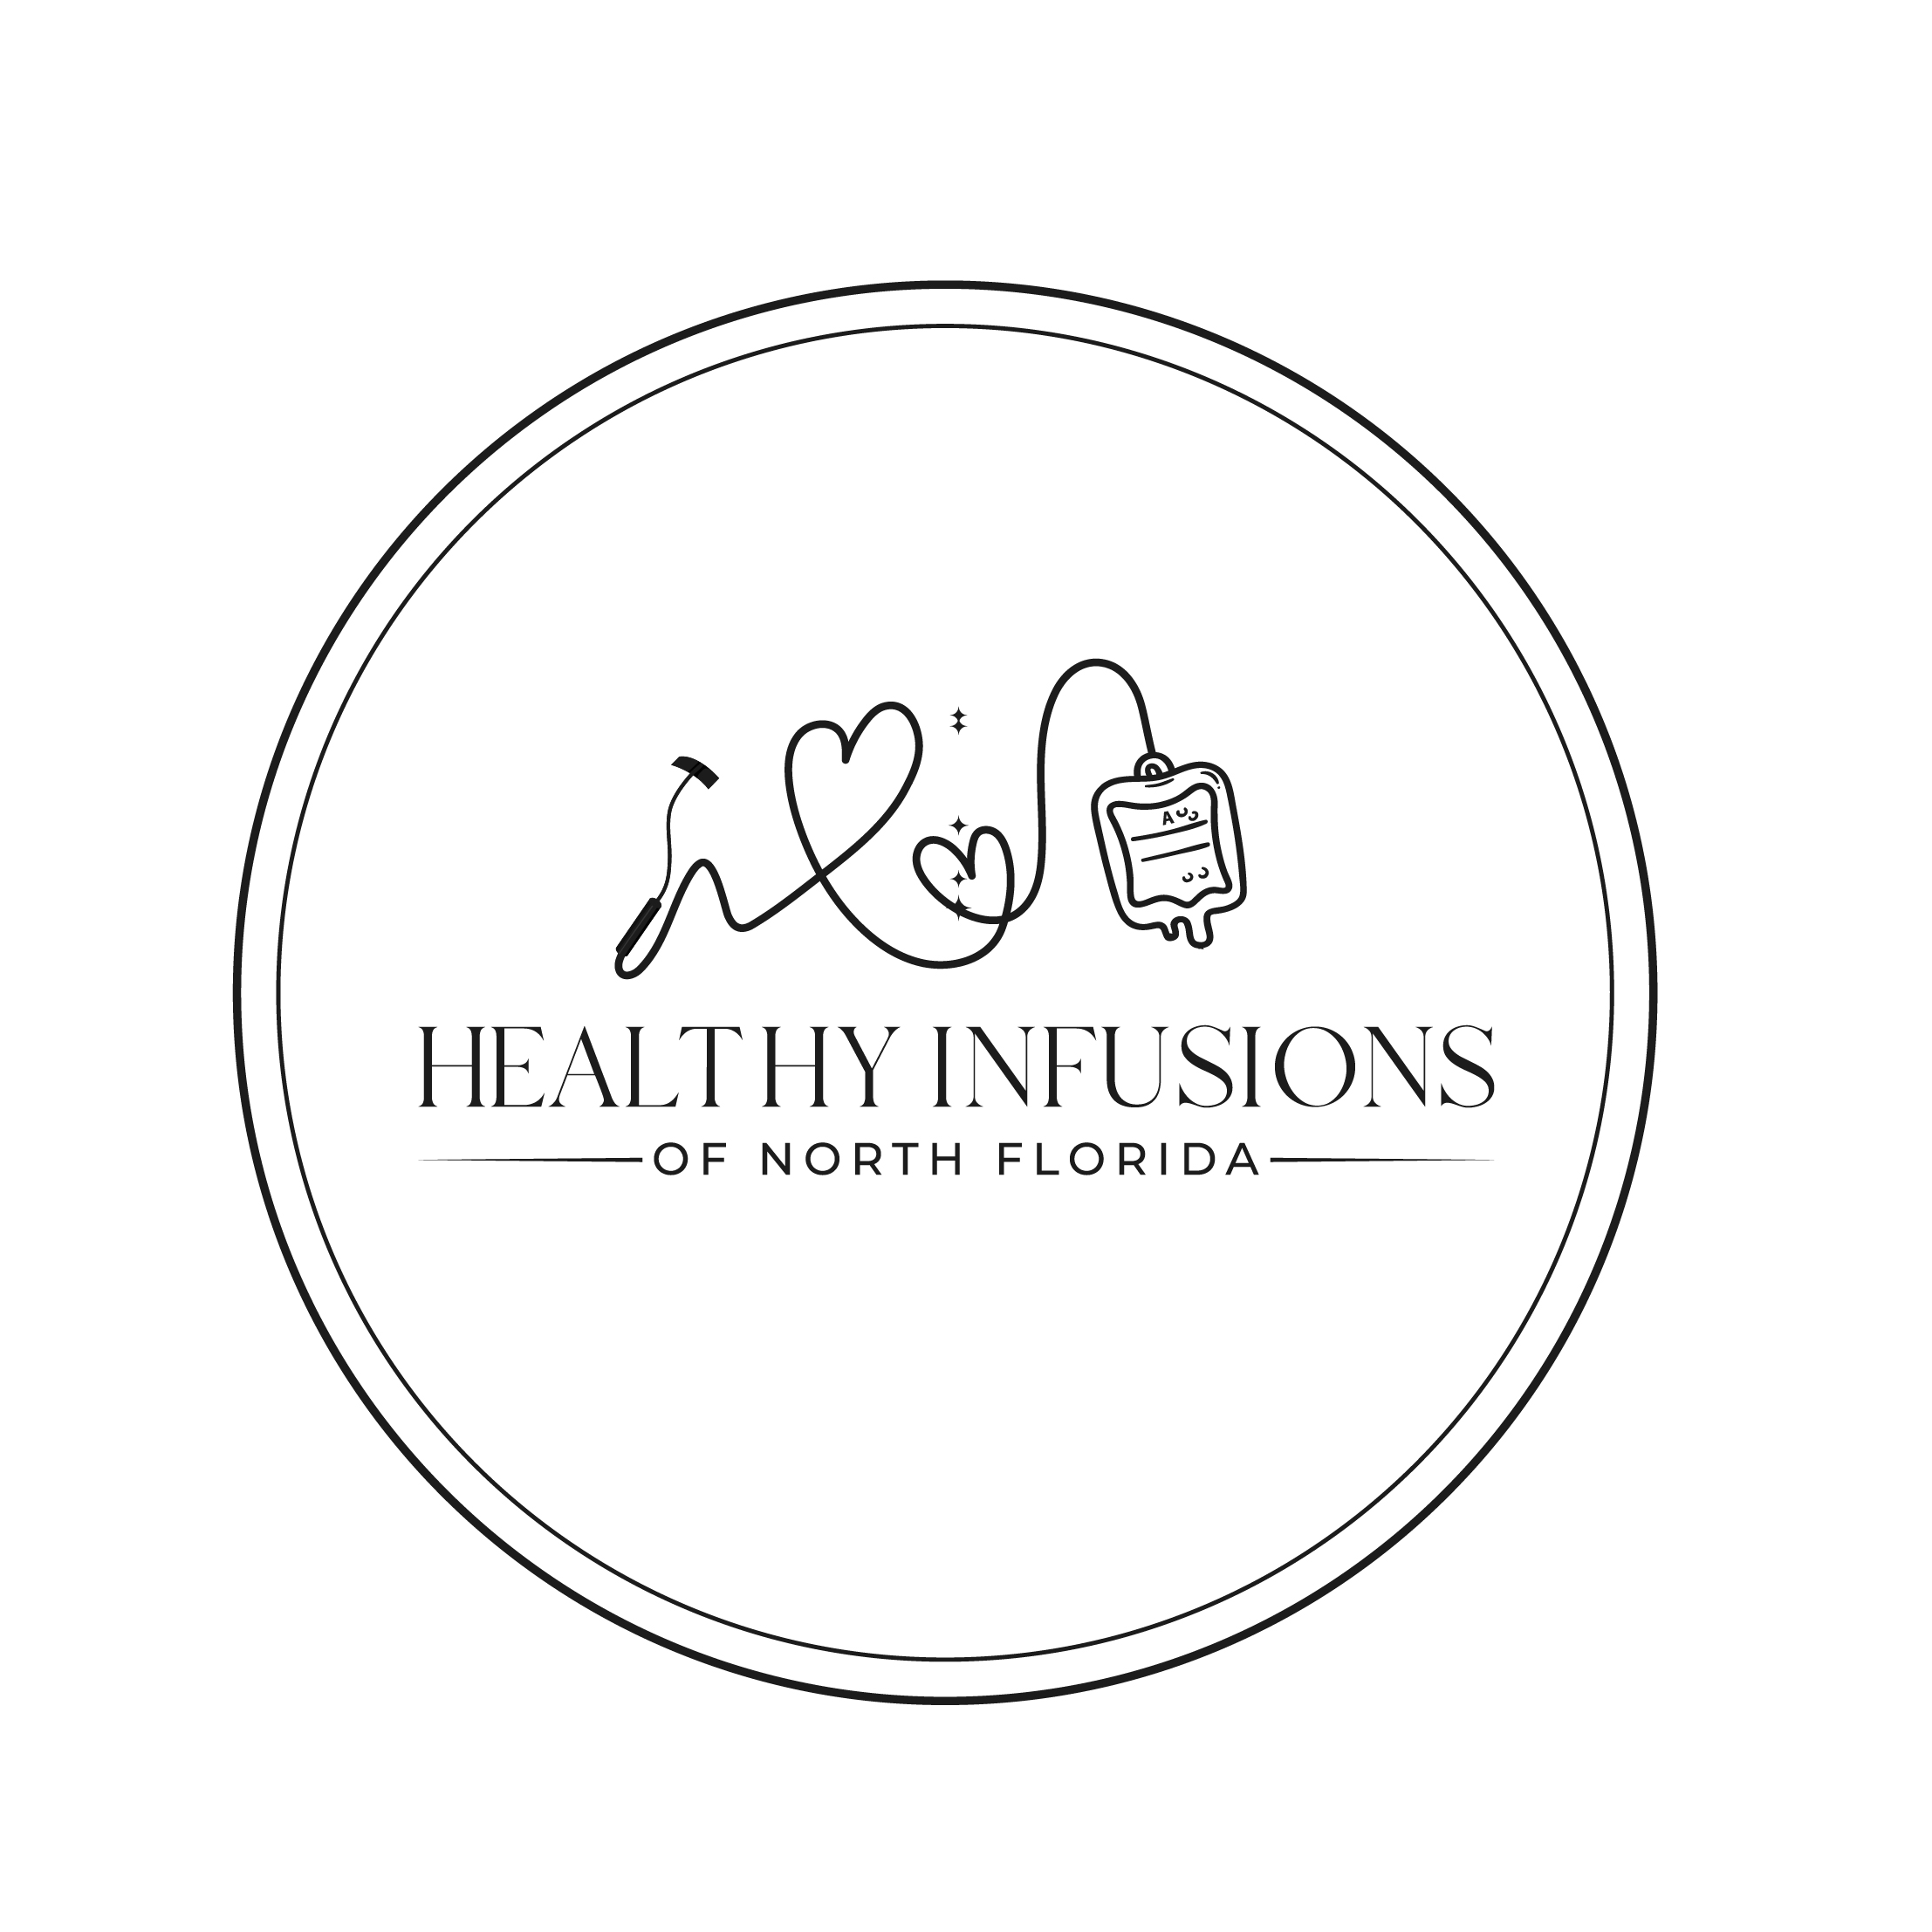 Healthy Infusions of North Florida